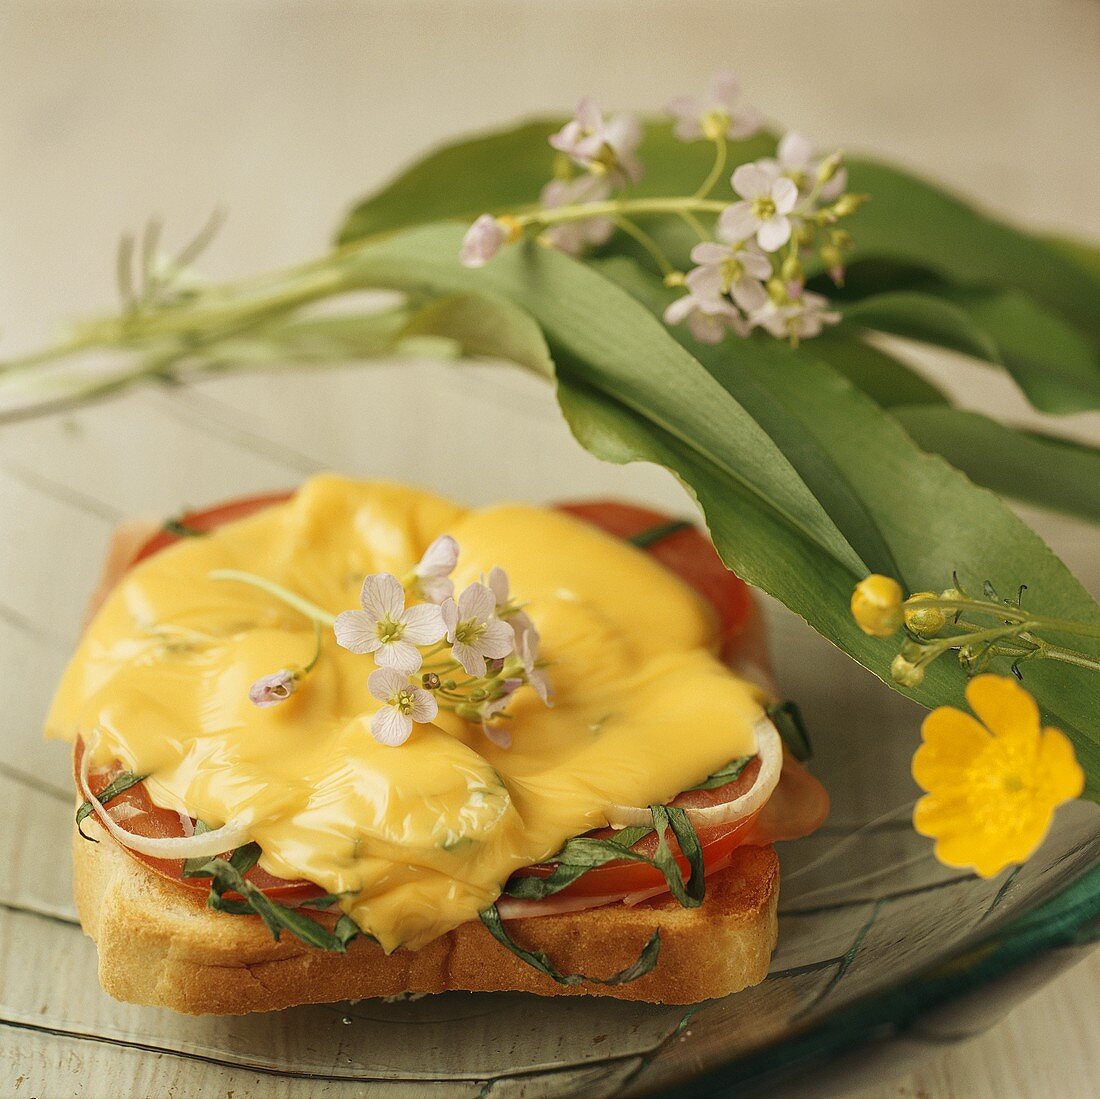 Ham and cheese on toast with ramsons (wild garlic)